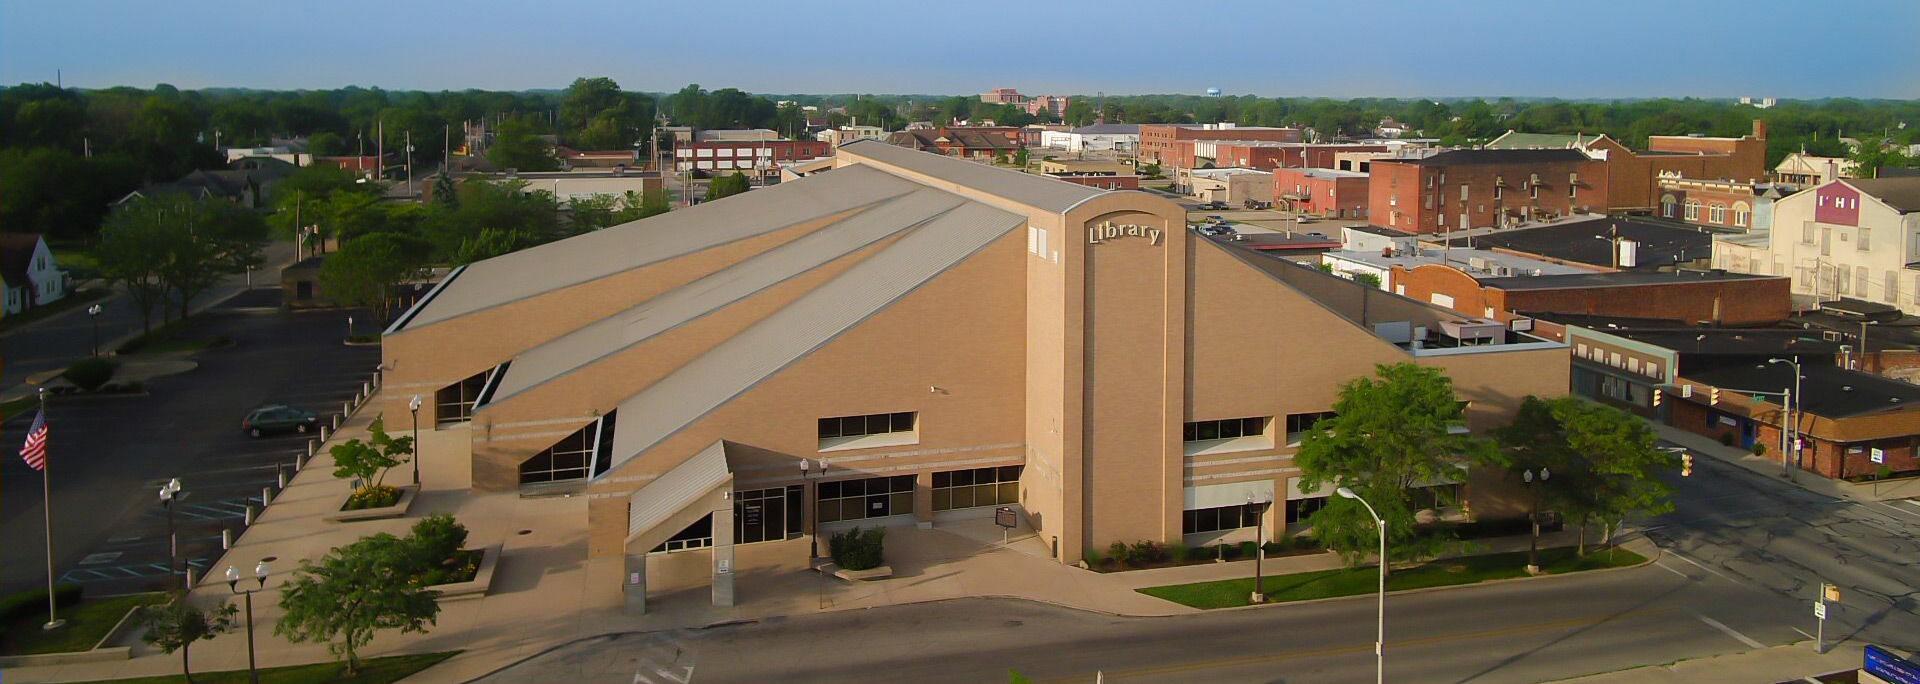 Aerial view of Main Library